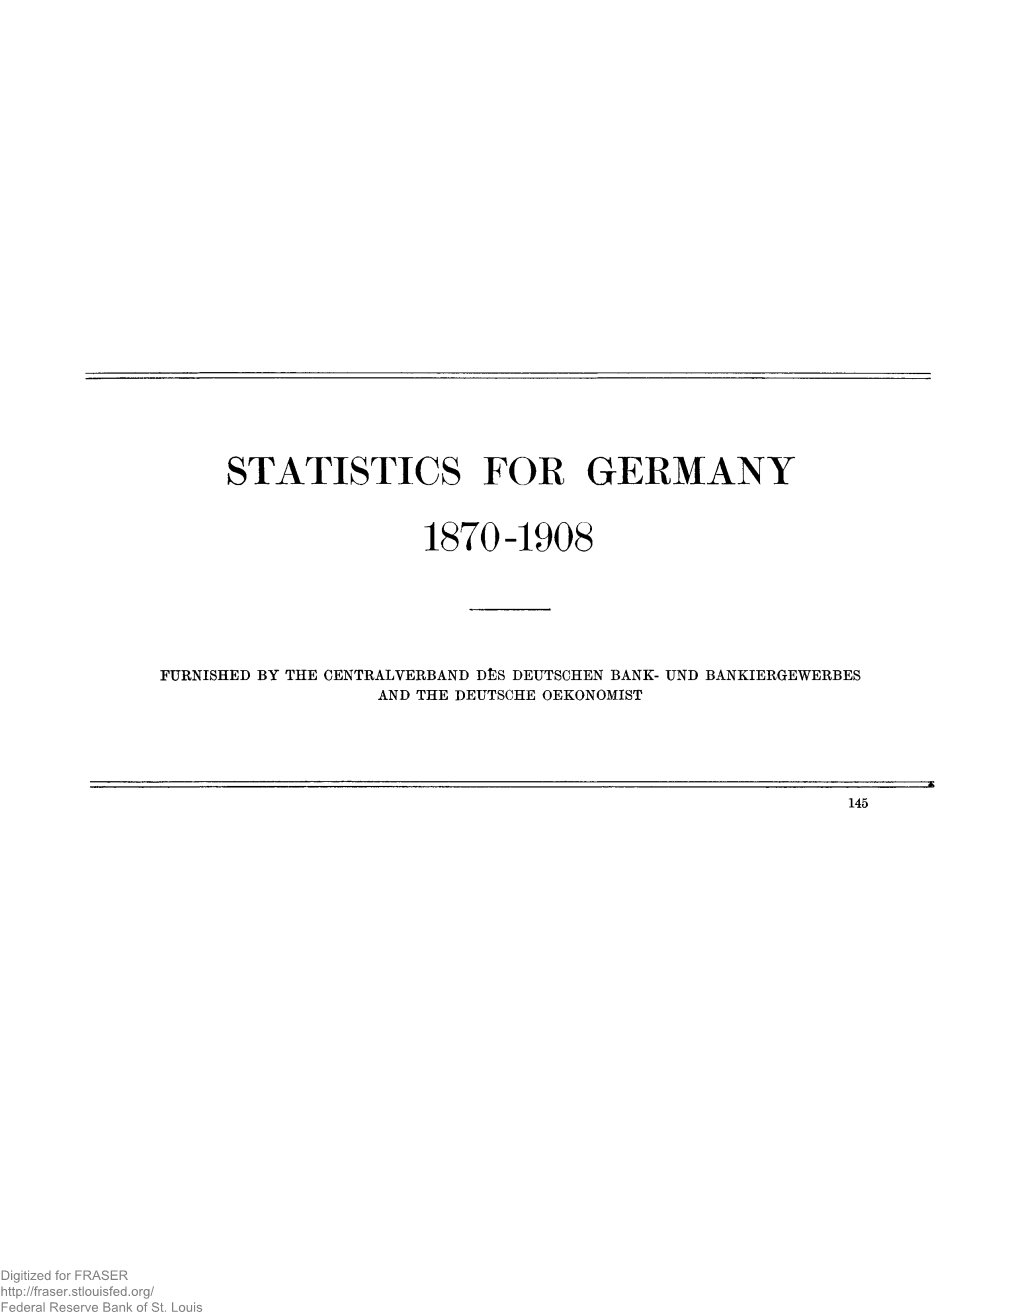 578. Statistics for Great Britain, Germany, and France, 1867-1909